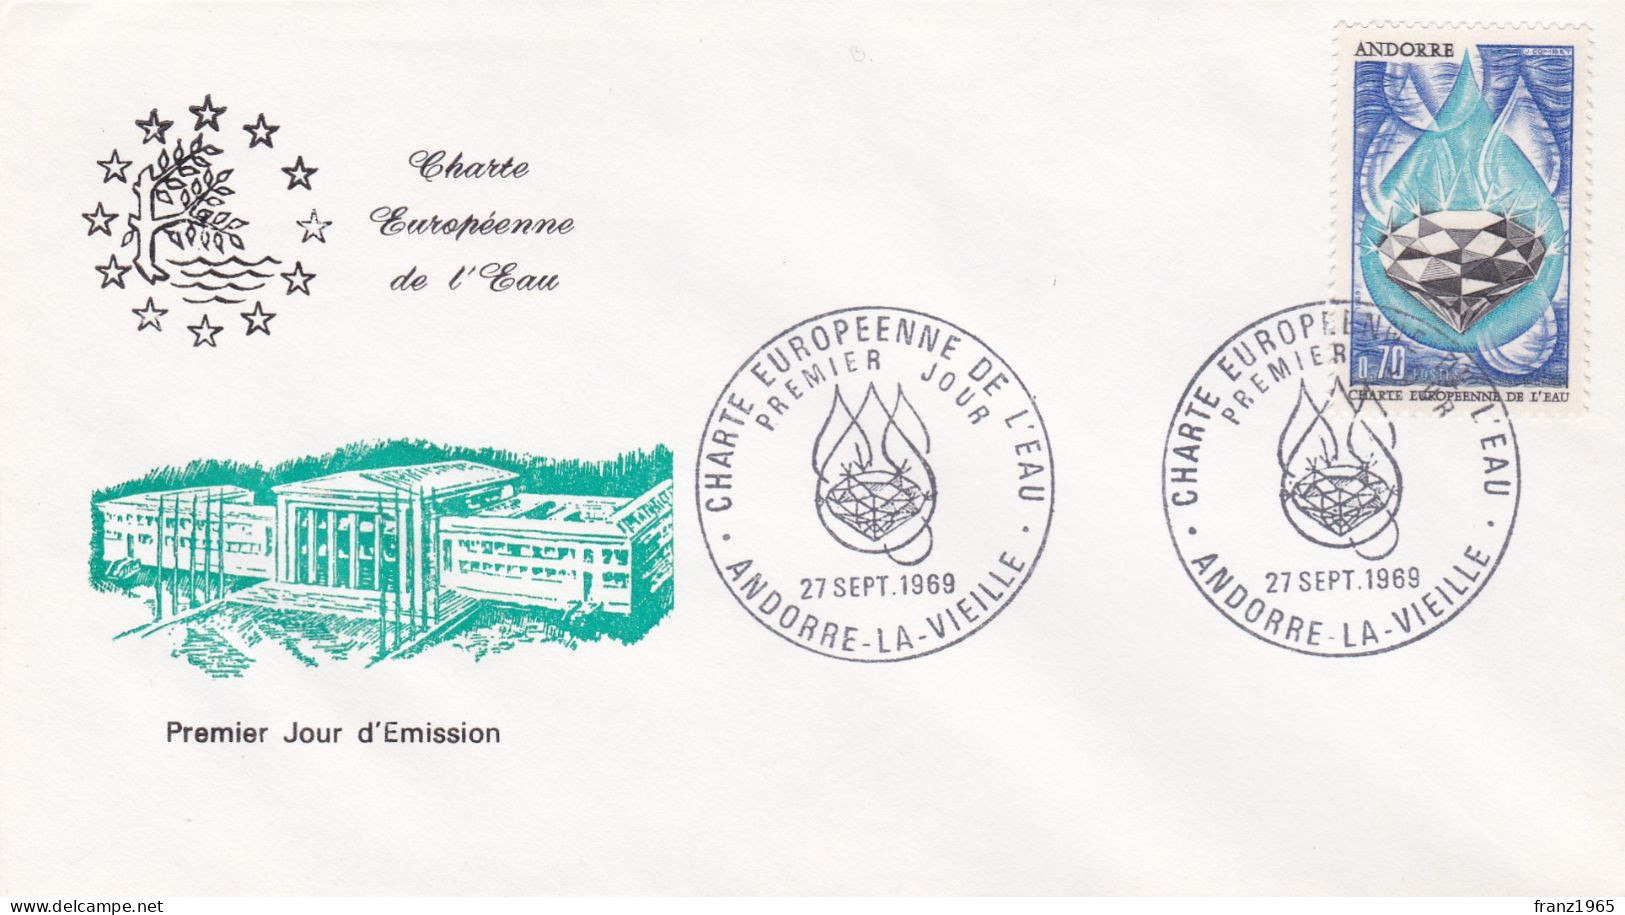 European Nature Preservation Year - 1995 - FDC